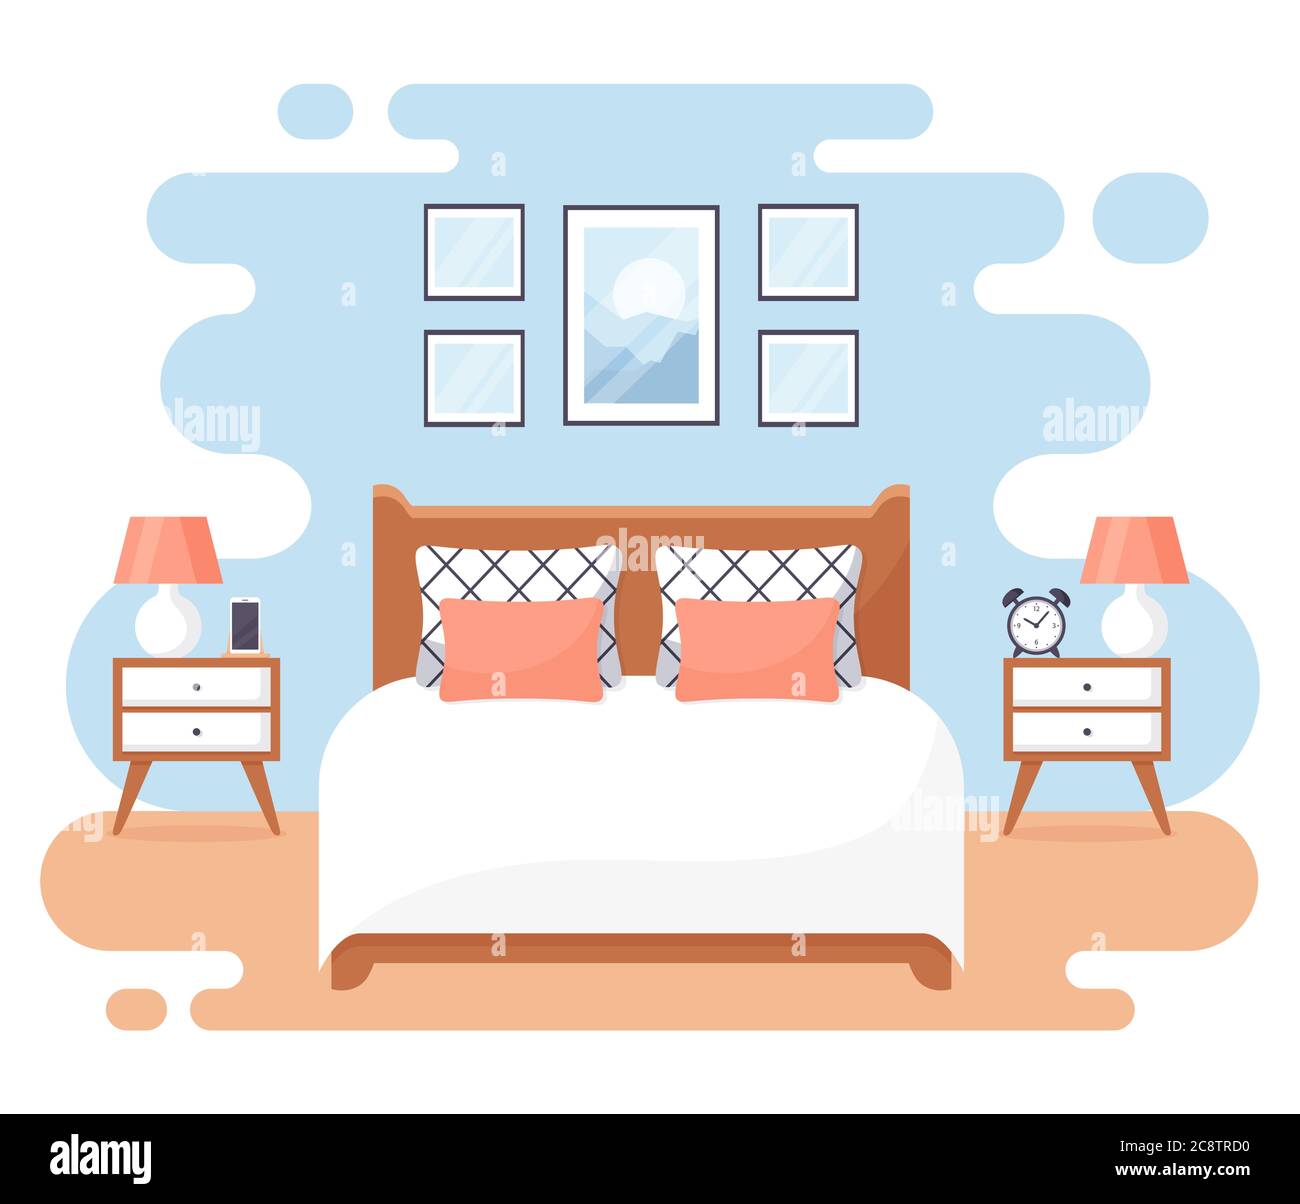 Bedroom interior. Modern banner. Vector. Design of a cozy room with double bed, bedside tables, and decor accessories. Home or hotel furnishings. Flat Stock Vector